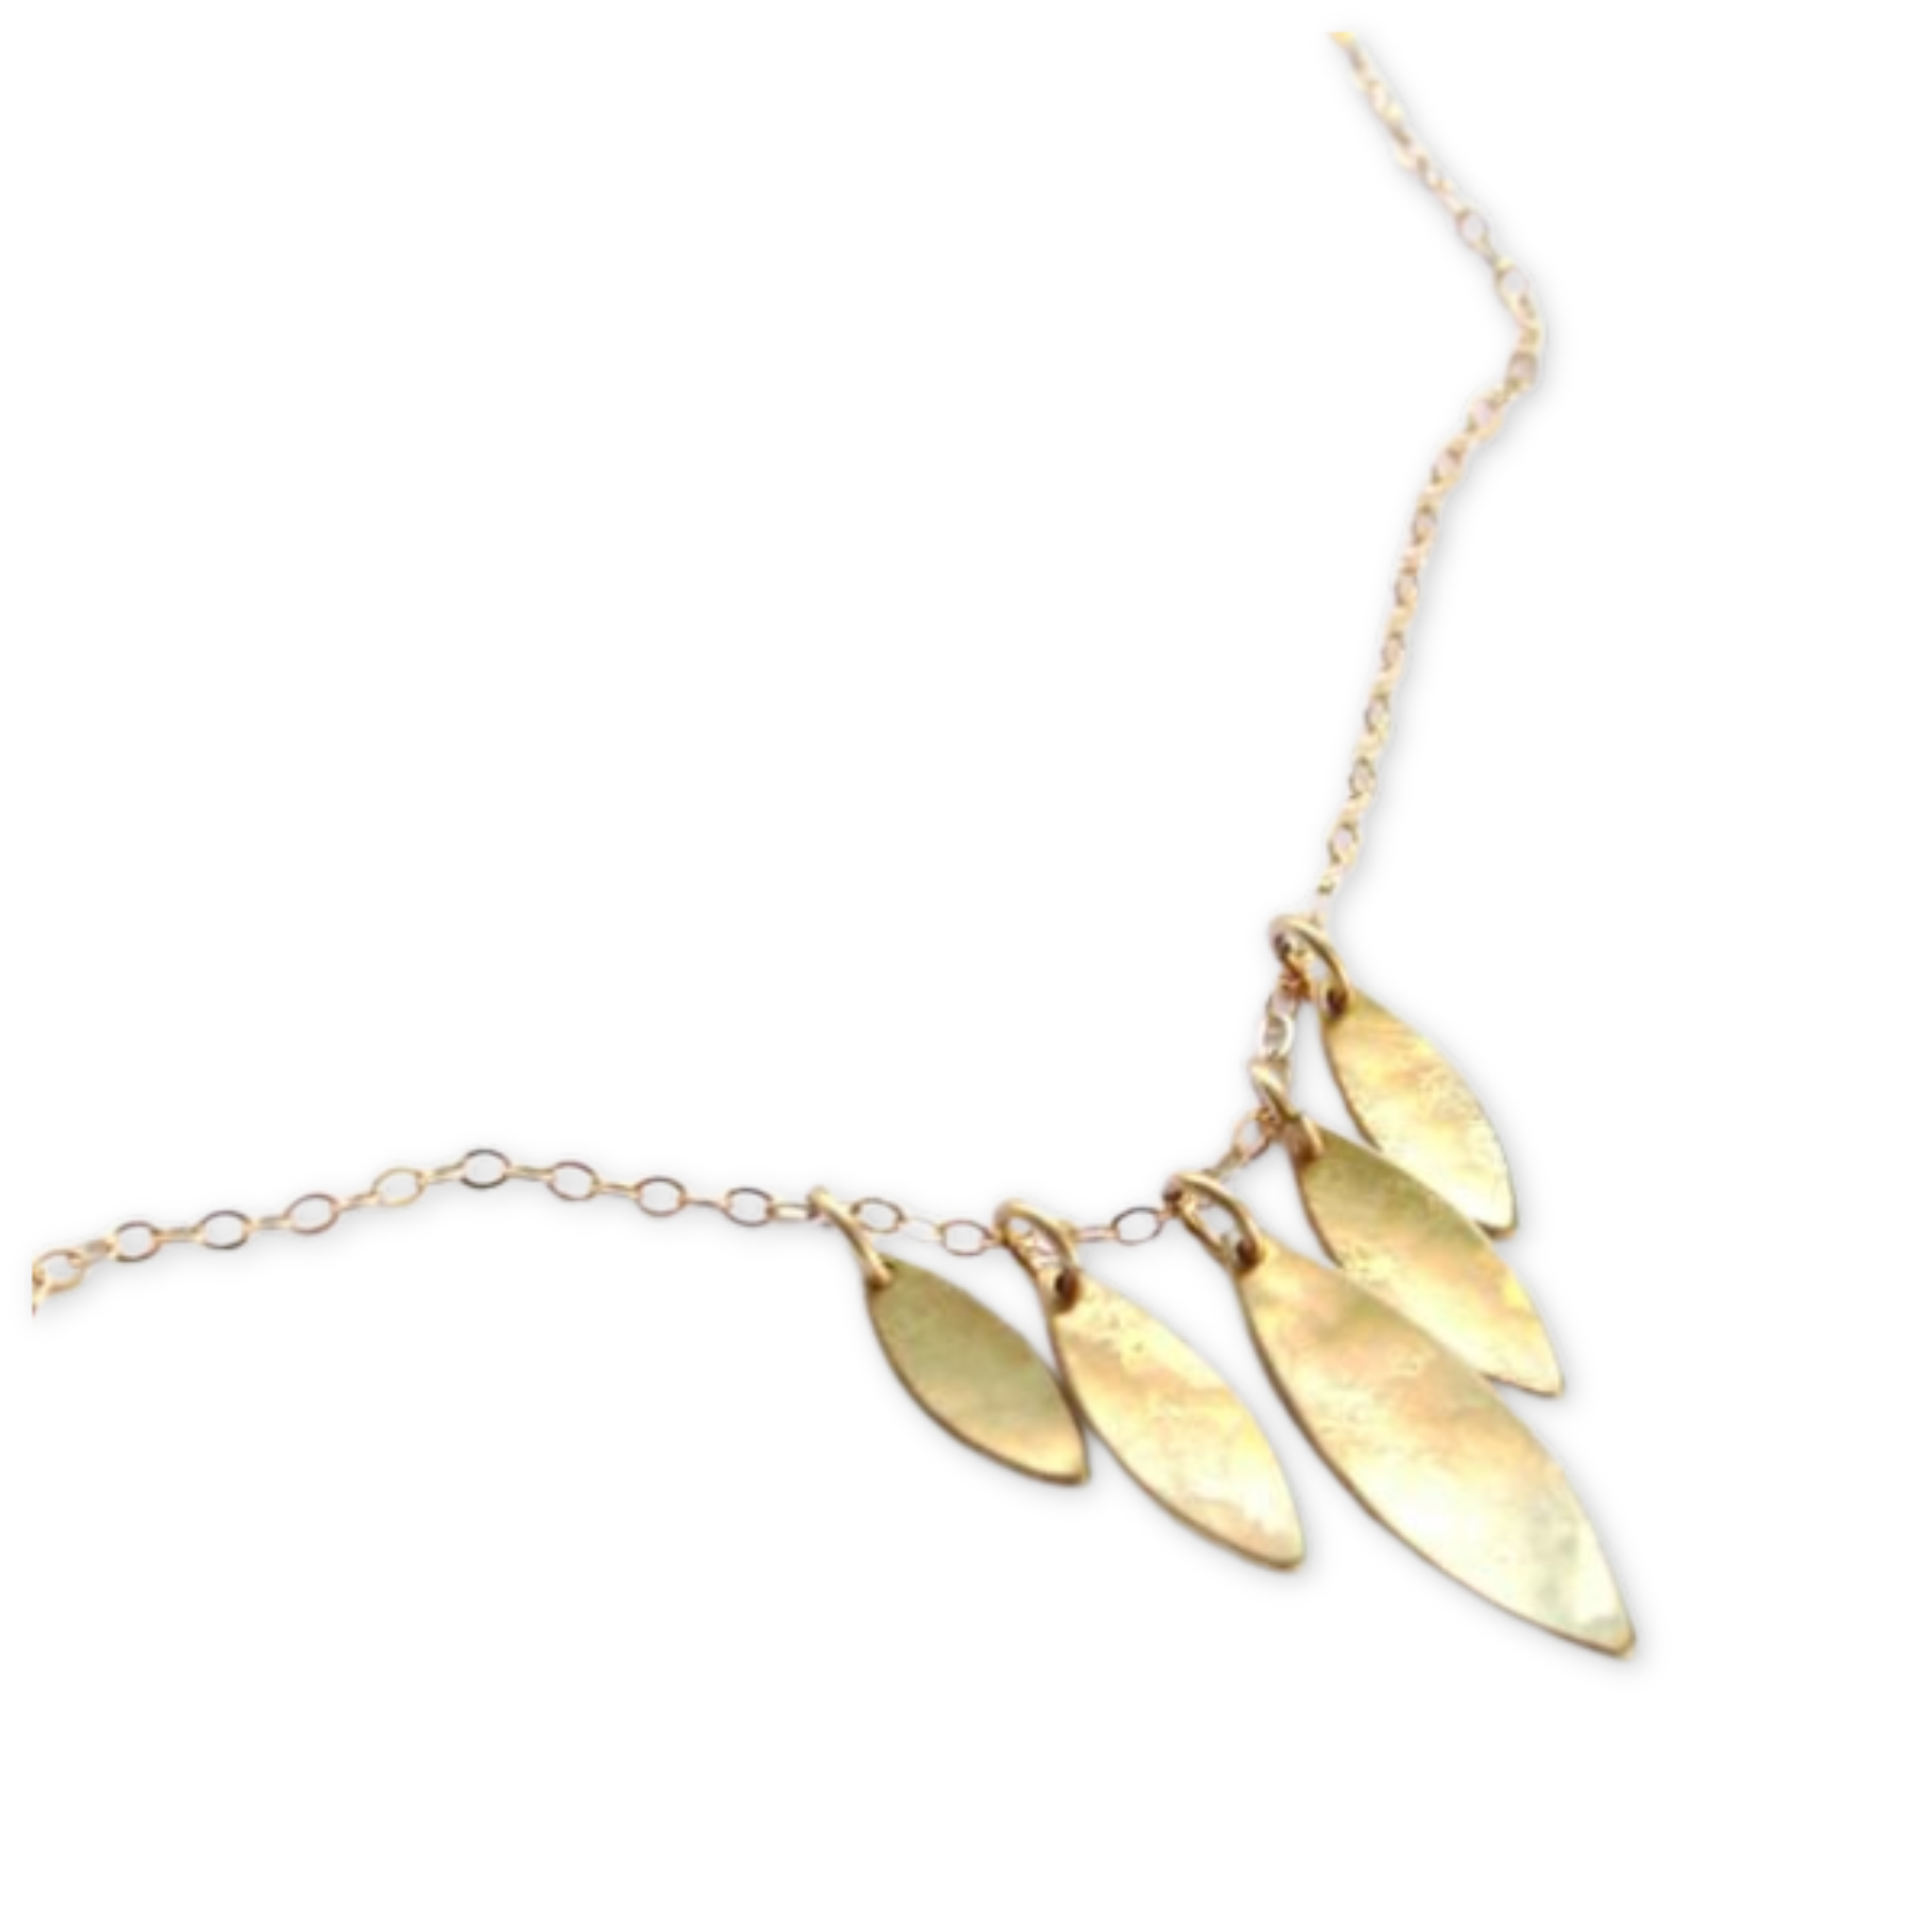 chain necklace with five leaf inspired hanging pendants 